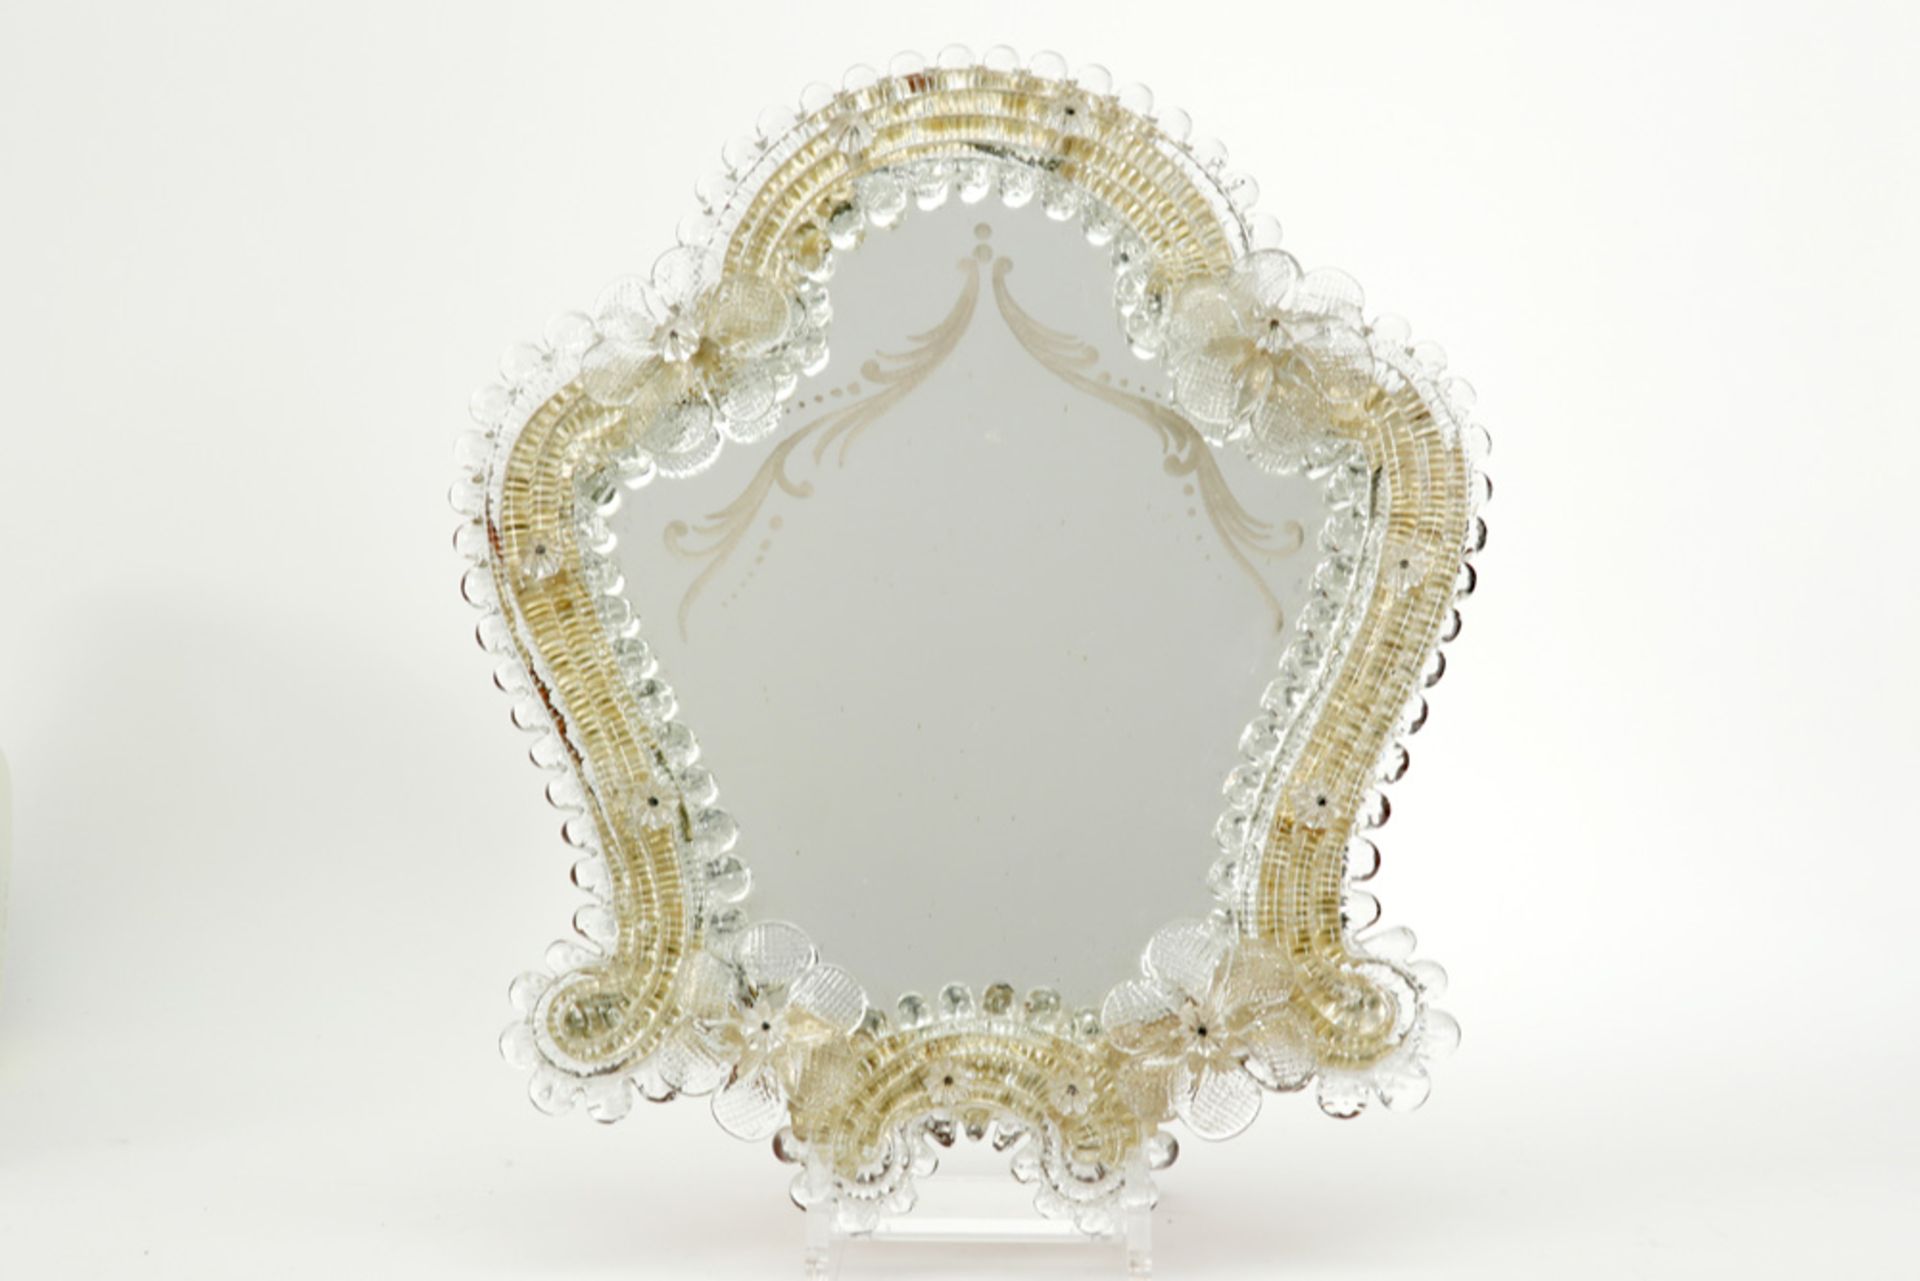 lot with a mirror with Murano glass frame and a round wooden tray with a depiction of Versailles, si - Image 3 of 3